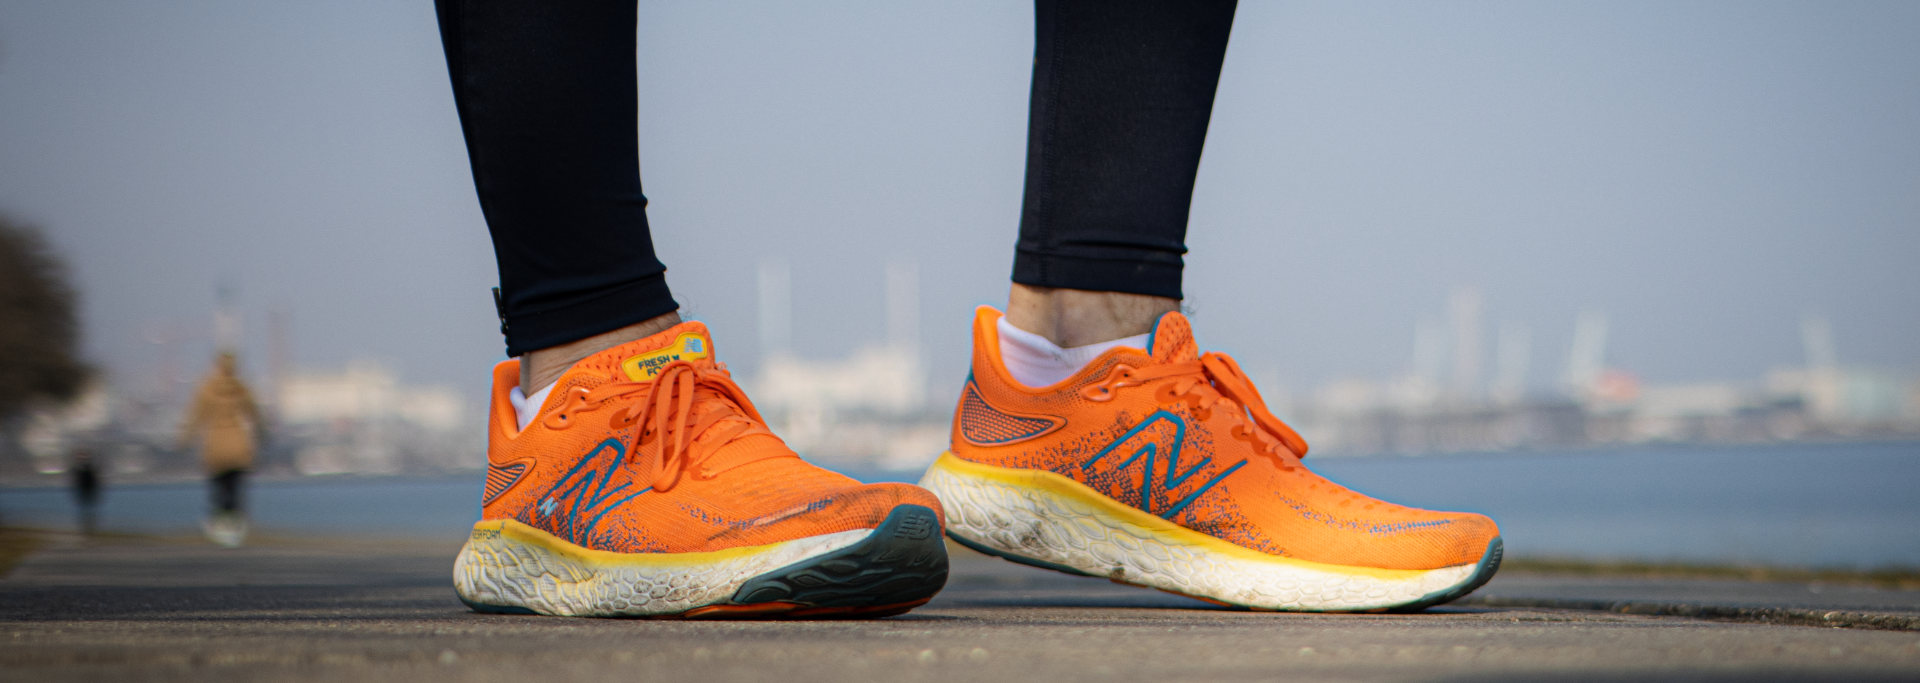 Maravilla Todopoderoso perfil REVIEW: New Balance 1080 v12 - watch the test here [VIDEO] - Inspiration